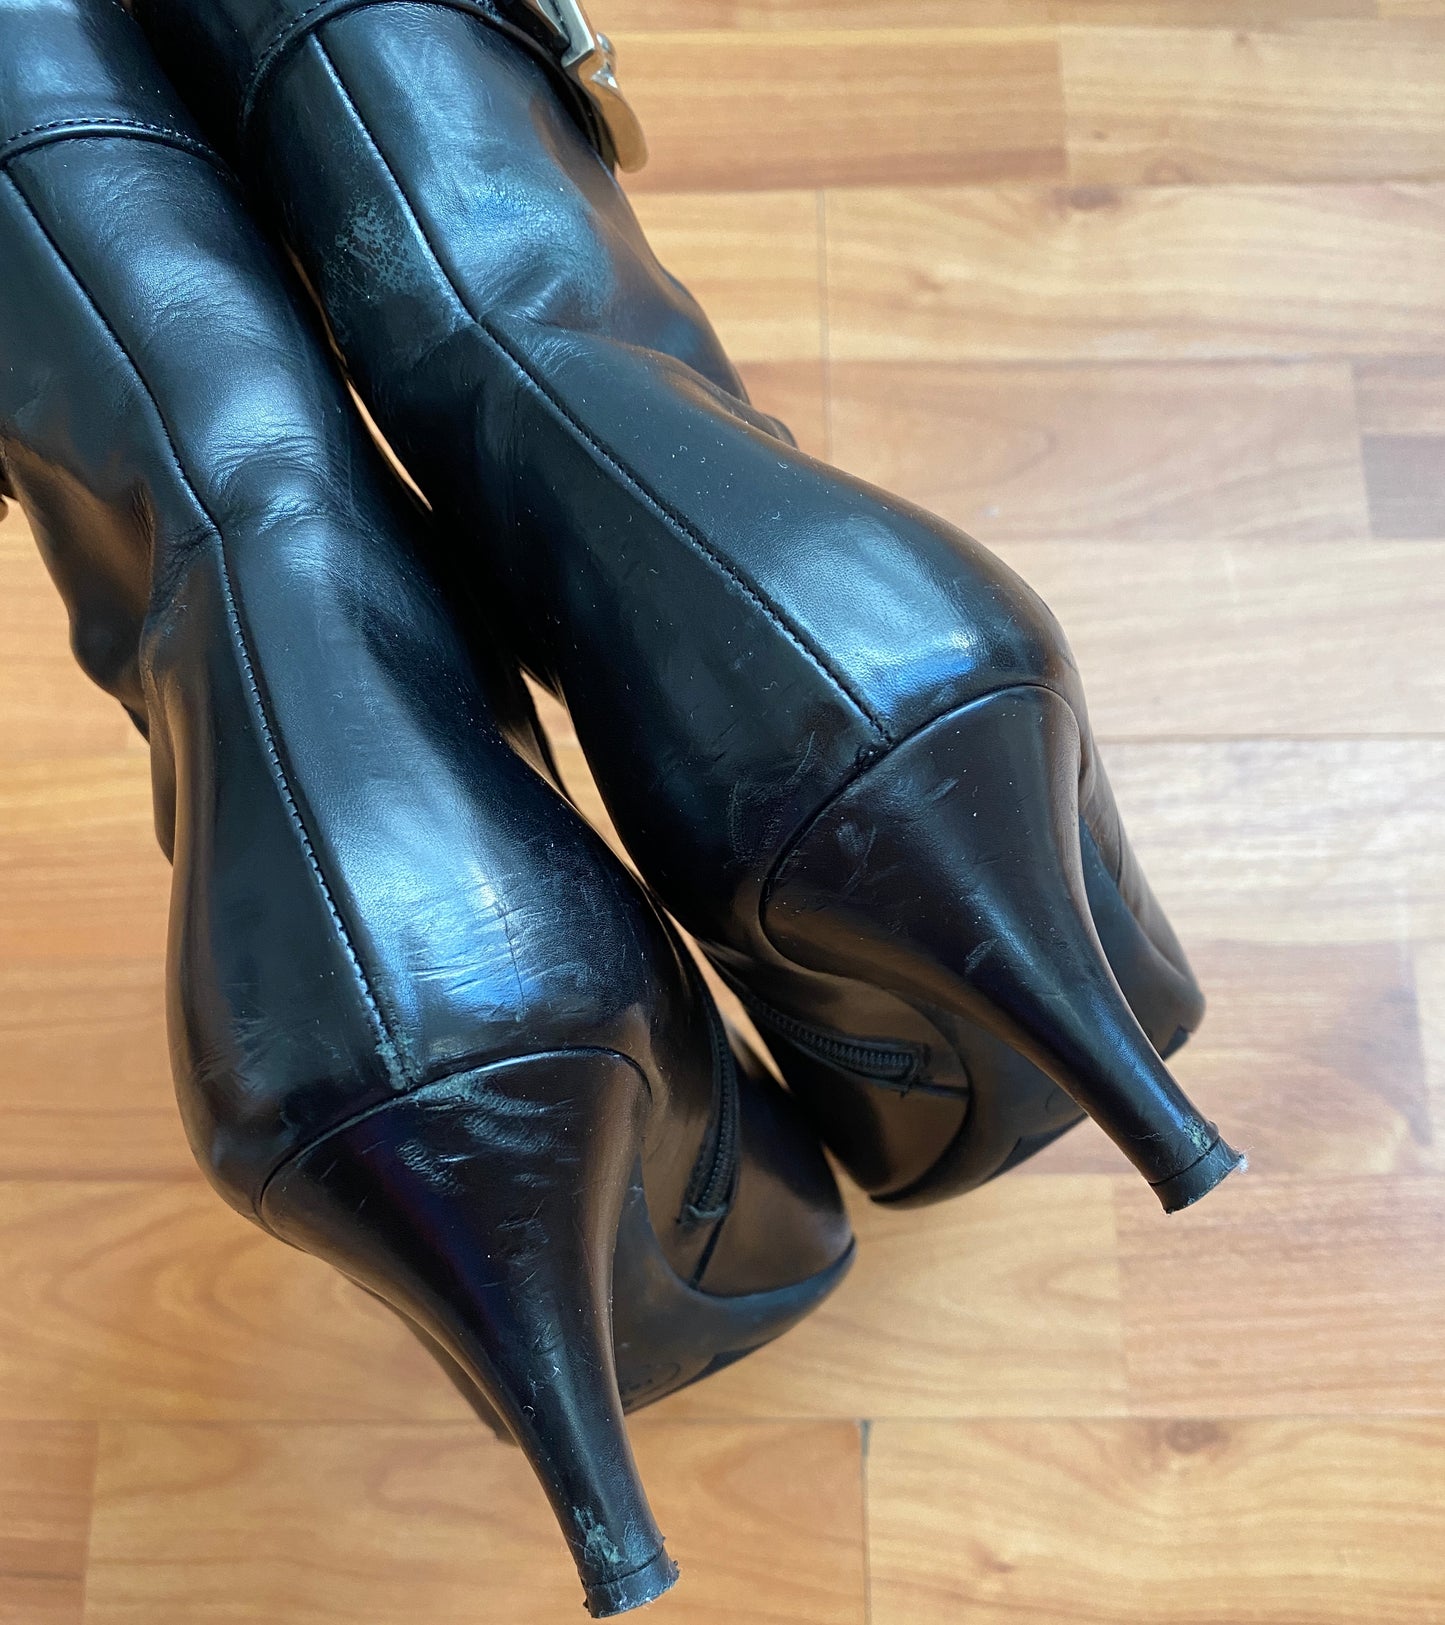 Black Prada boots featuring a buckle and pointy toe